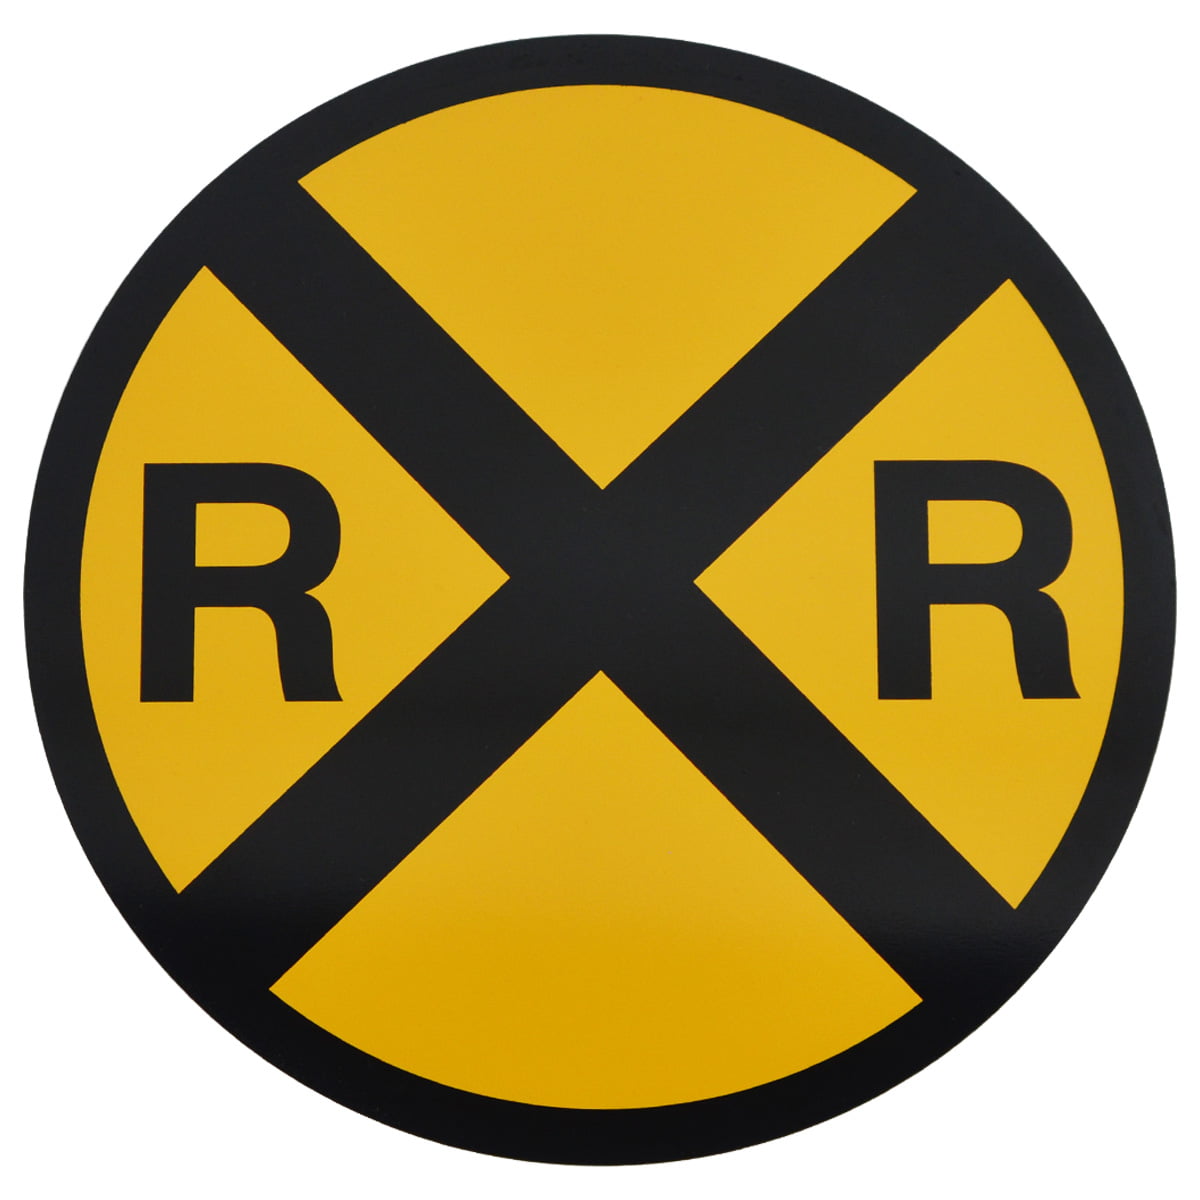 Steam Train Crossing Decal Zone Xing Tall lover model RR railroad 